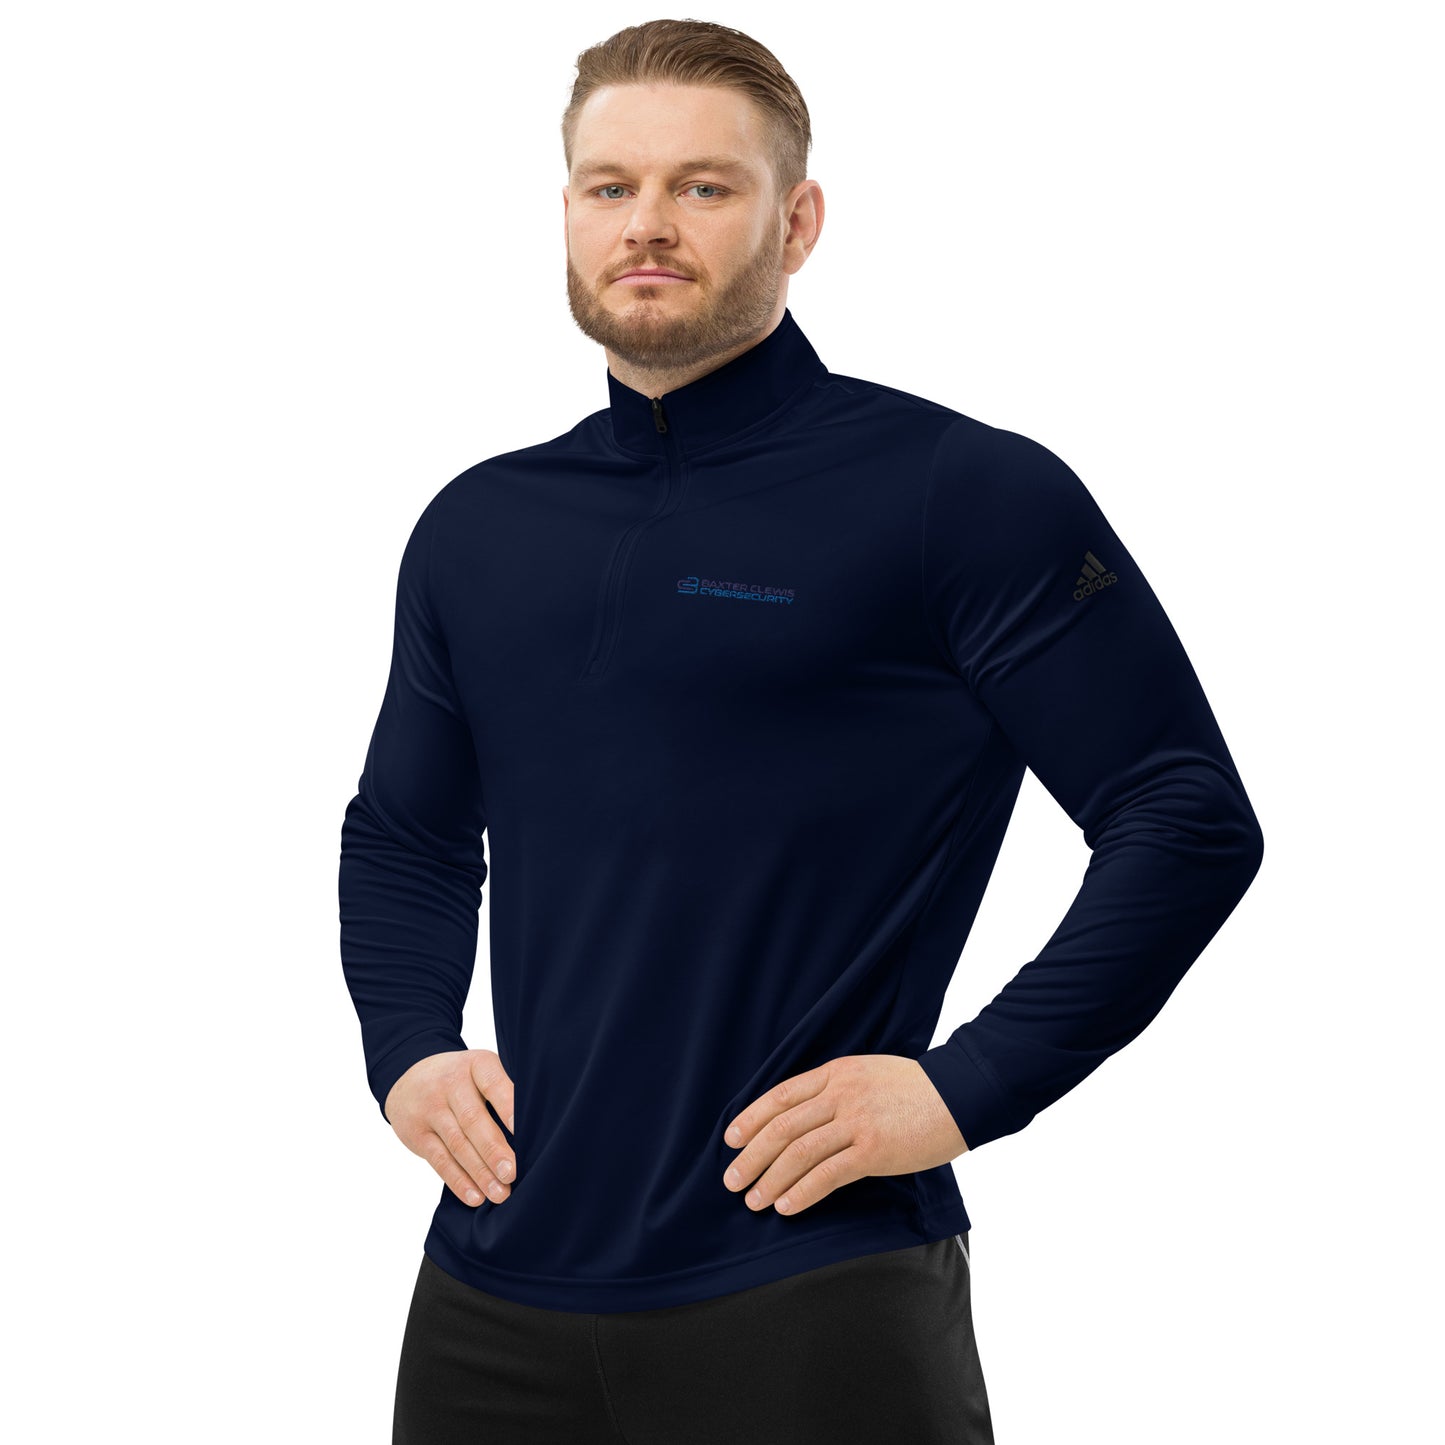 Baxter Clewis Cybersecurity Quarter zip pullover